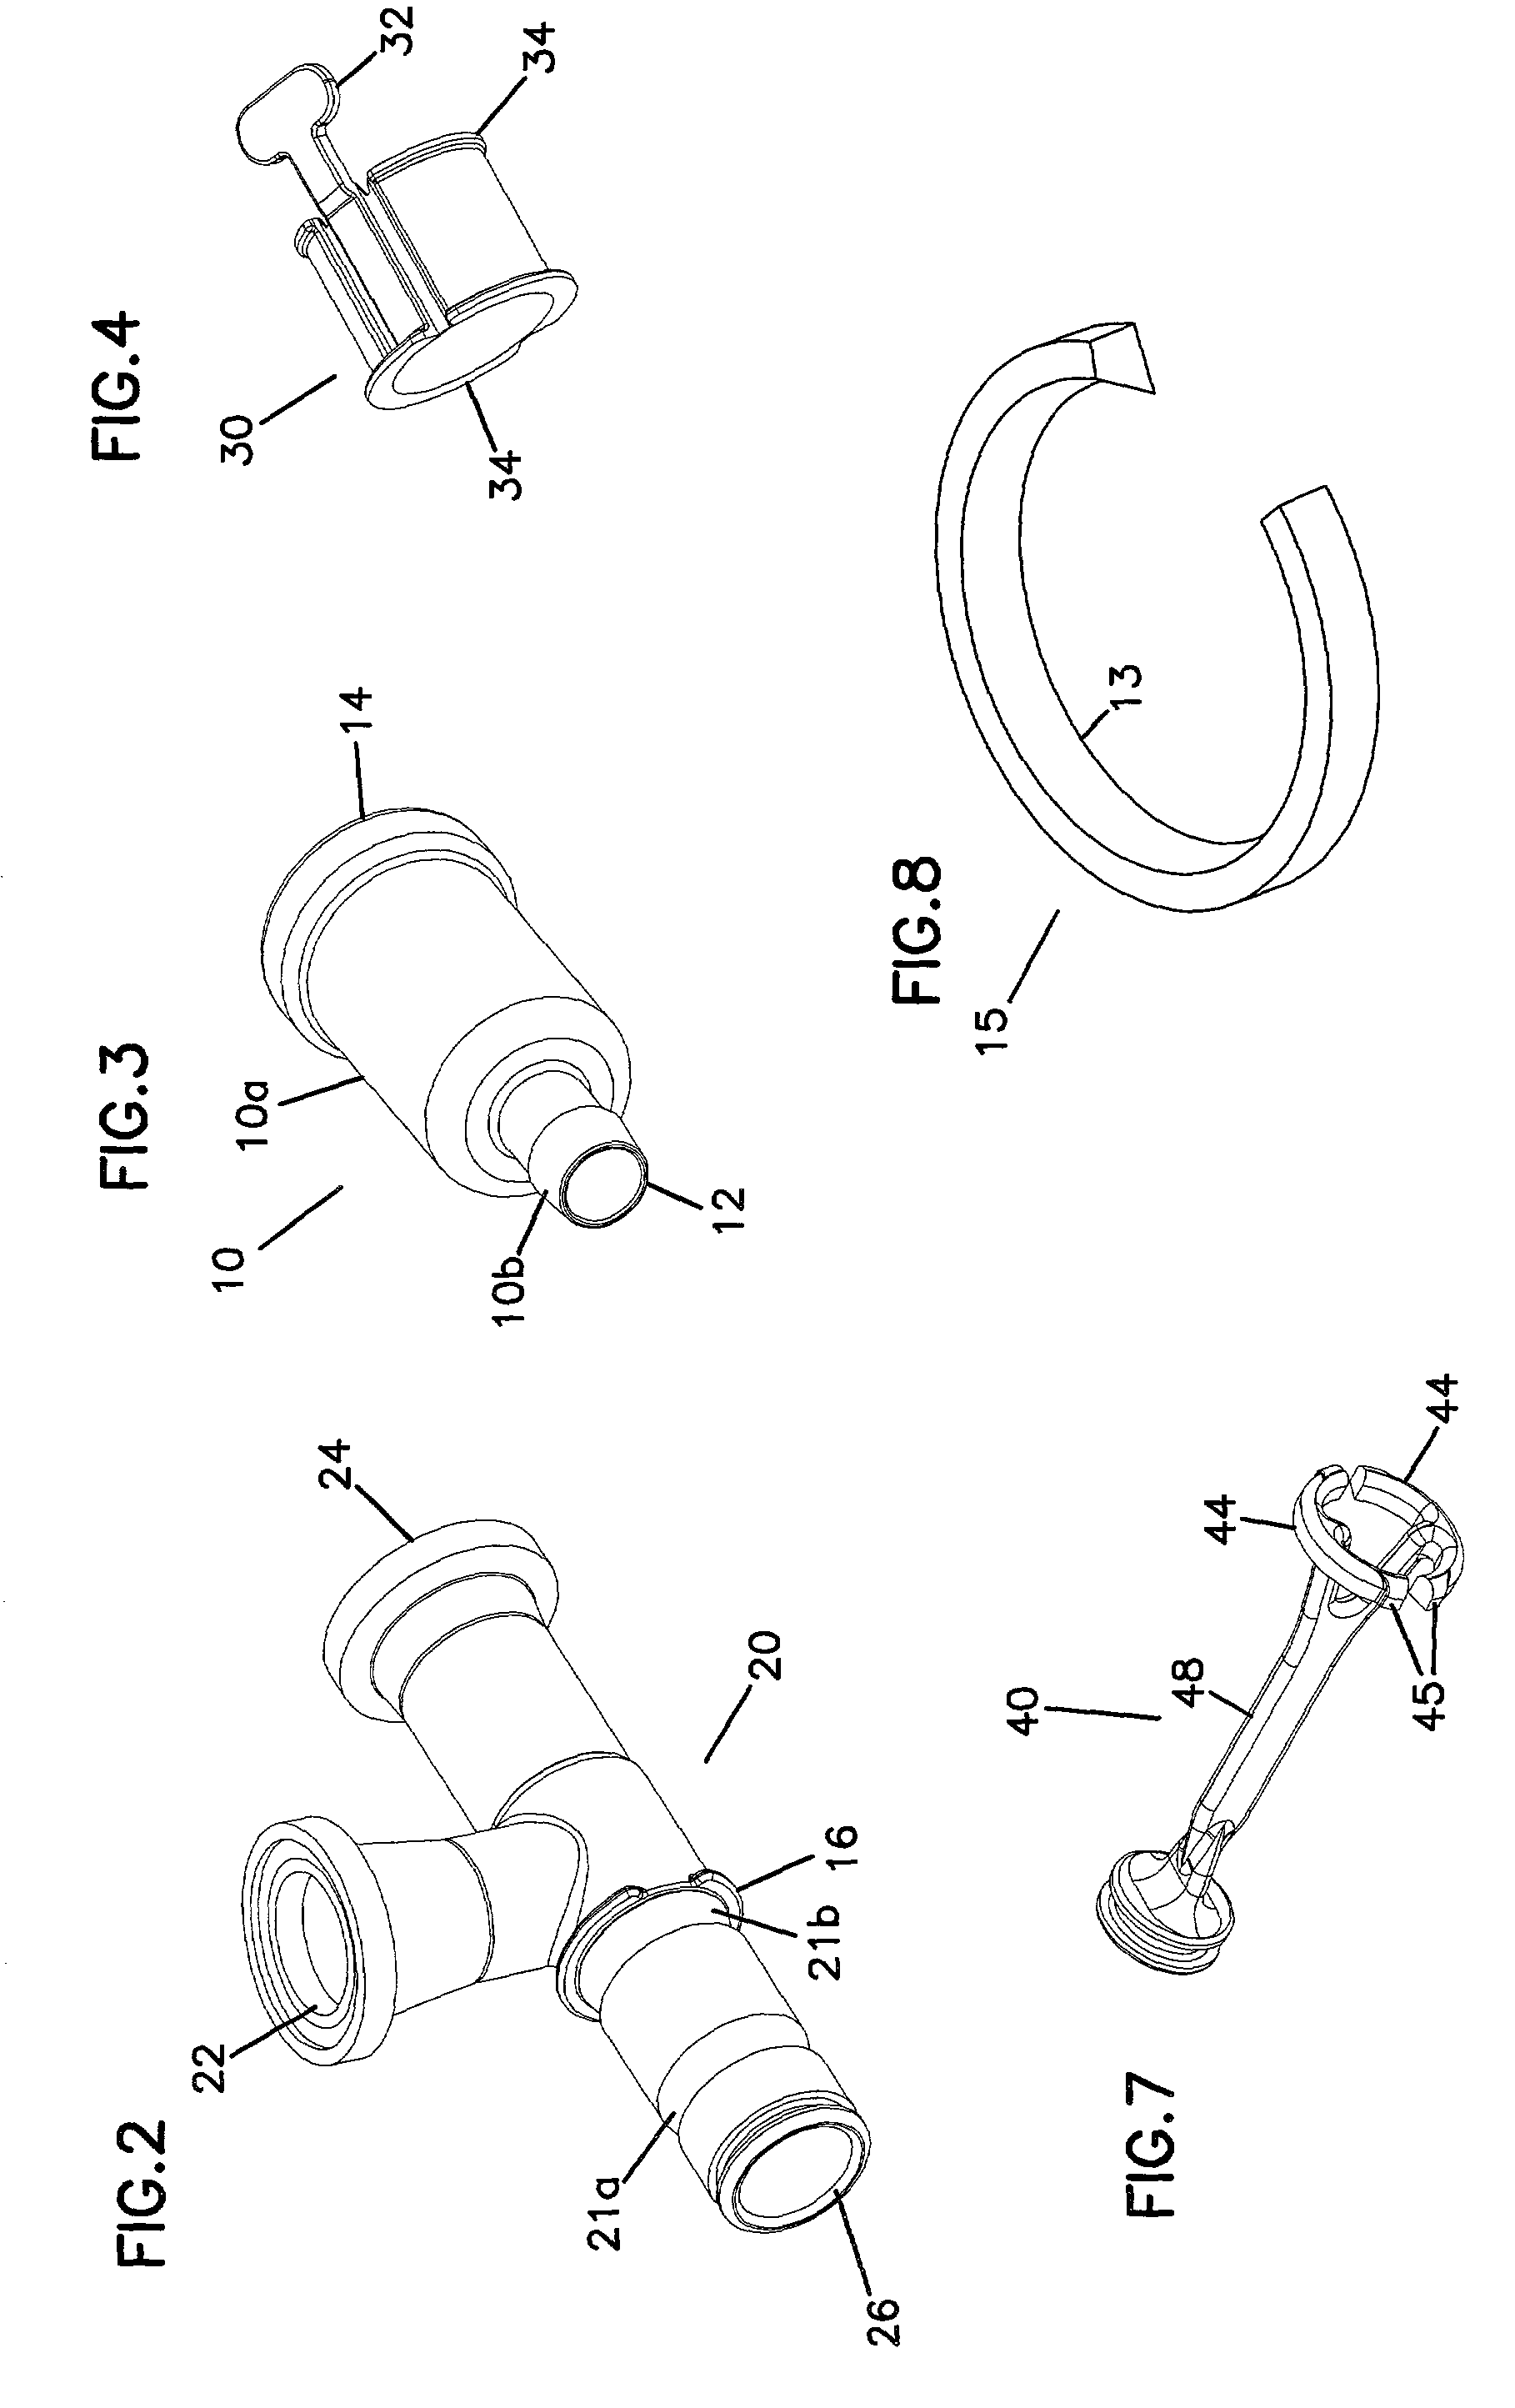 Connector apparatus and method of coupling bioprocessing equipment to a media source